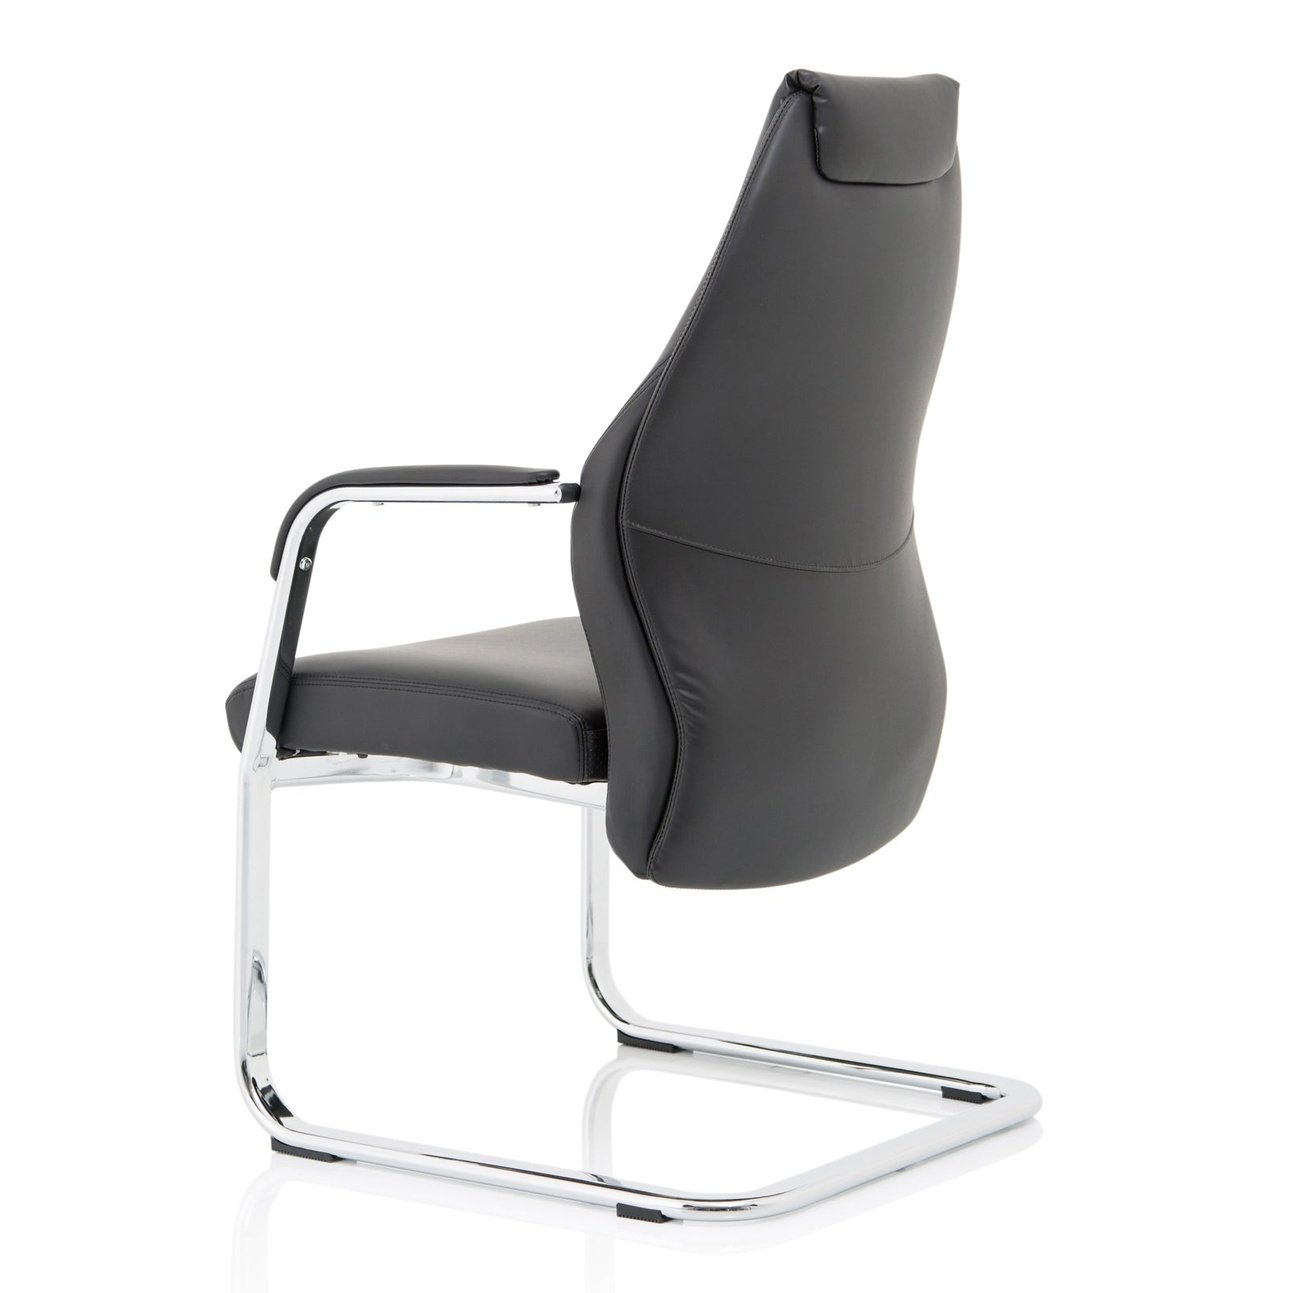 Mien High Back Leather Cantilever Office Chair - Visitor, Chrome Frame, 110kg Capacity, 8hr Use, 5yr Warranty - Flat Packed